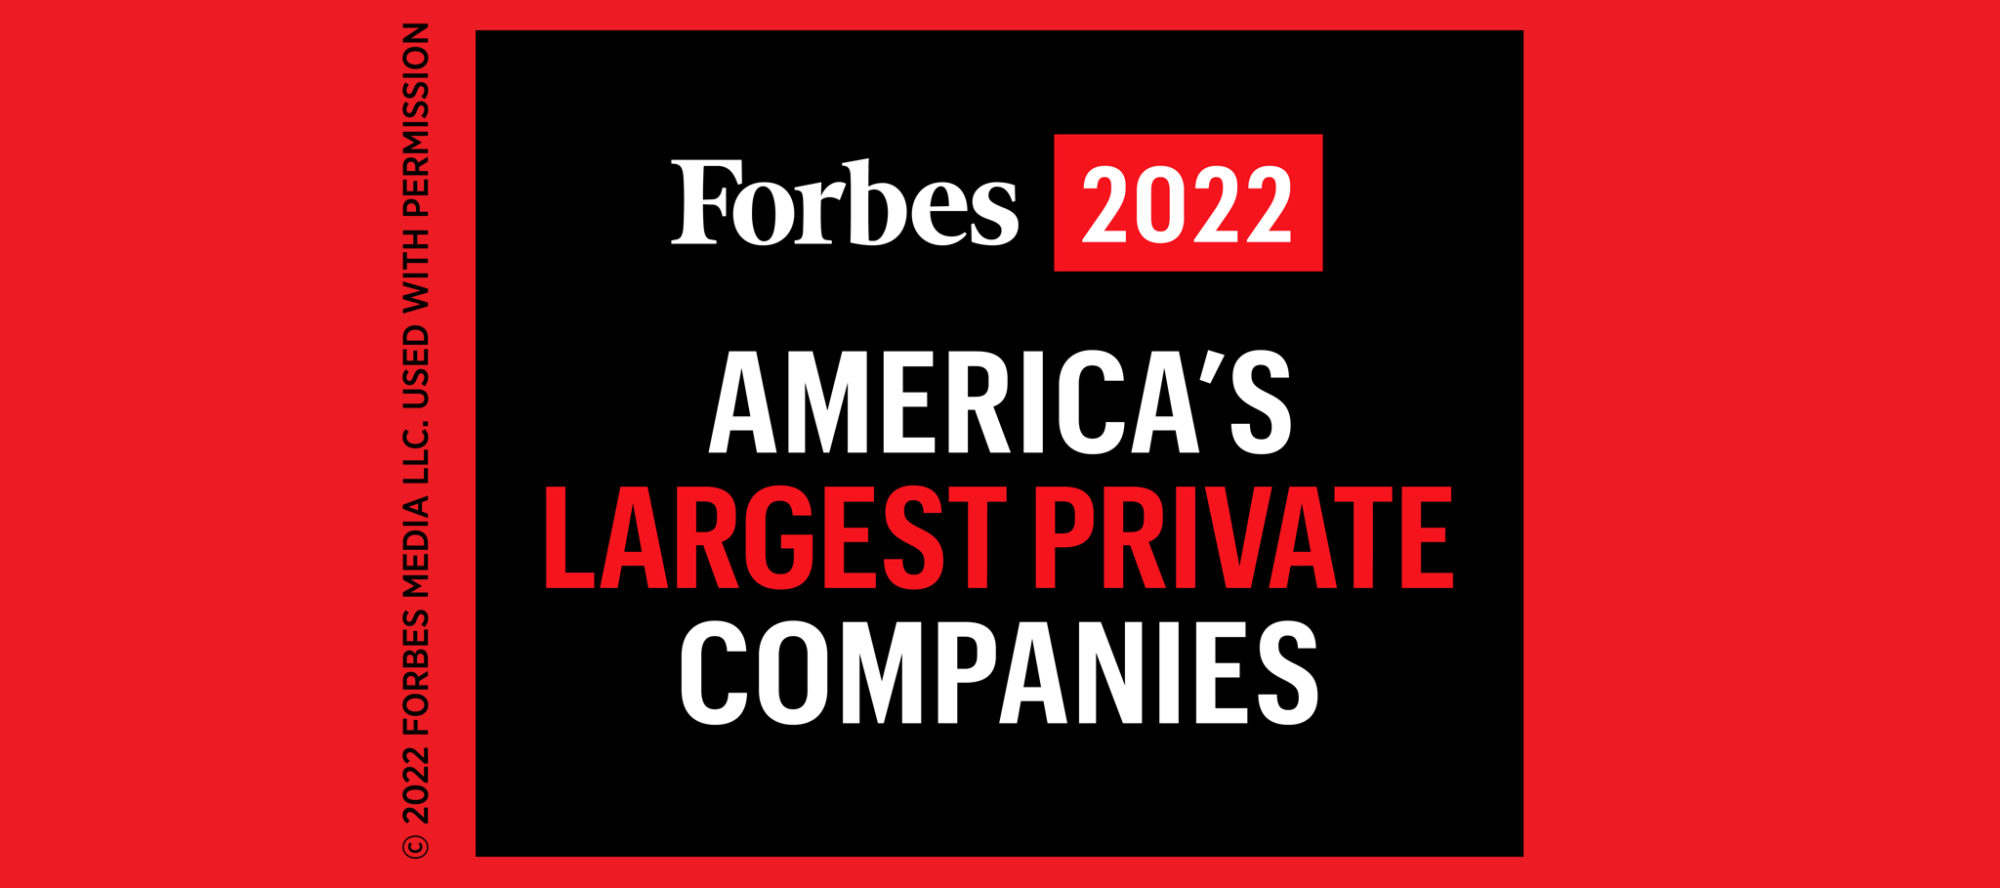 Forbes 2022 America's Largest Private Companies